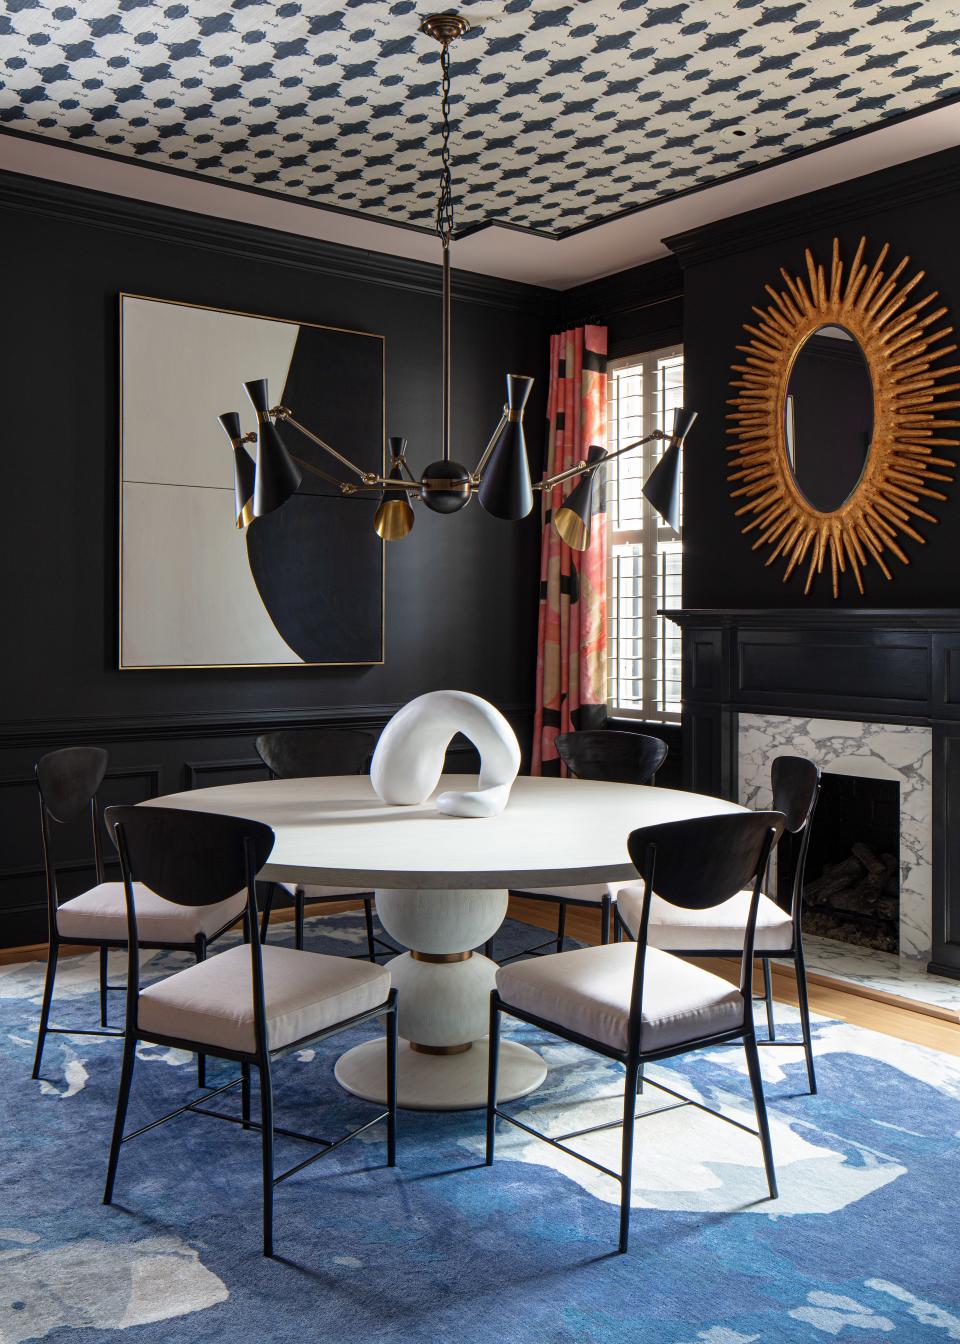 The starting point for the dining room was Benjamin Moore Black Berry walls. The deep blue-black provided a dramatic backdrop that allowed patterns to leap off the walls, ceiling, and floor. Lindsay’s Navy White Grasscloth was used to create a faux tray ceiling accented with Farrow & Ball Calamine paint. Jill pumped up the volume in the dining room with the artist’s Blue Wool Silk Rug and Porter Teleo draperies, Oly Studio dining chairs, a Mr. Brown London honed Carrara marble table, a Julian Chichester light fixture, and a mirror by Made Goods.